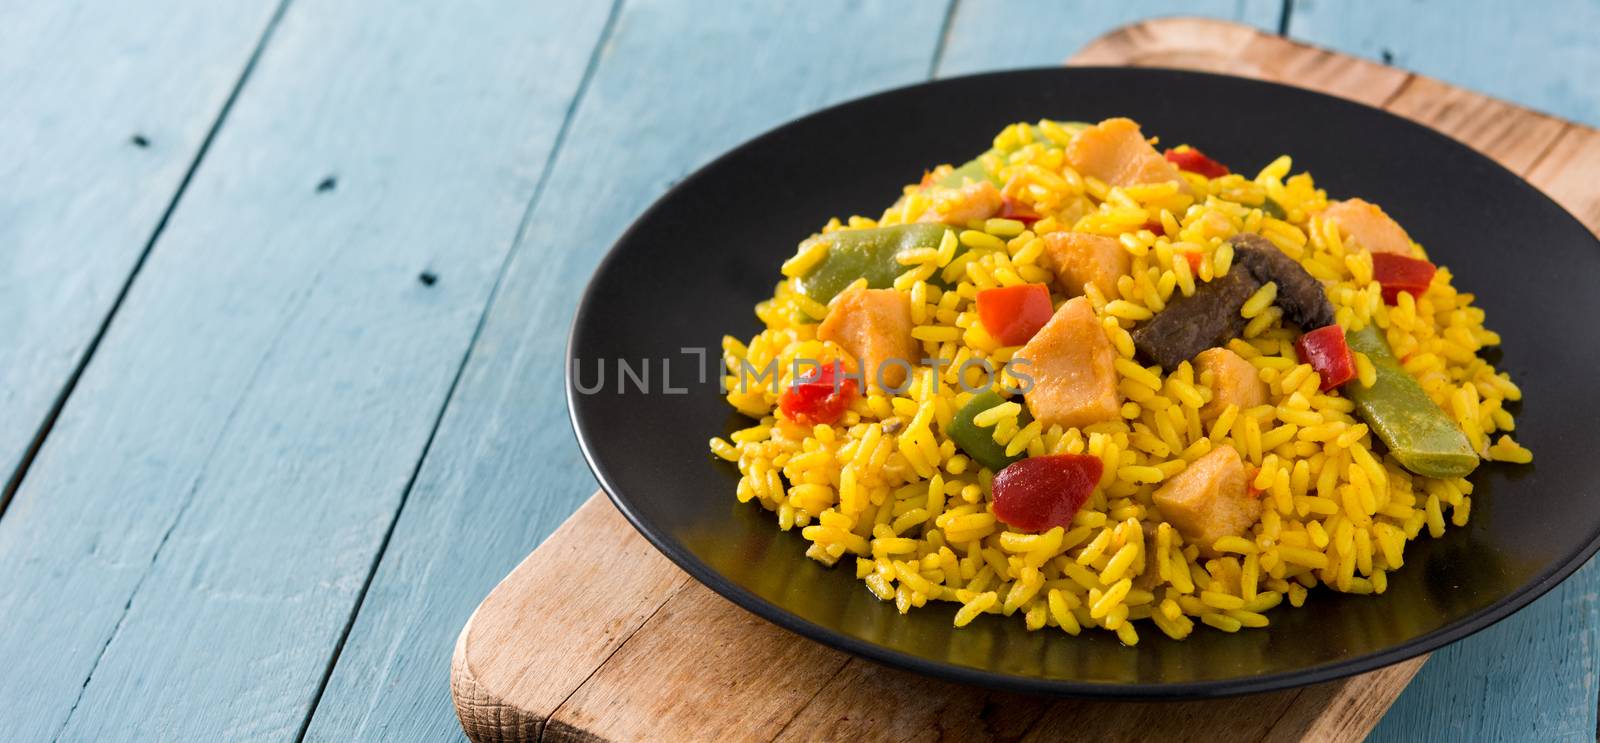 Fried rice with chicken and vegetables by chandlervid85